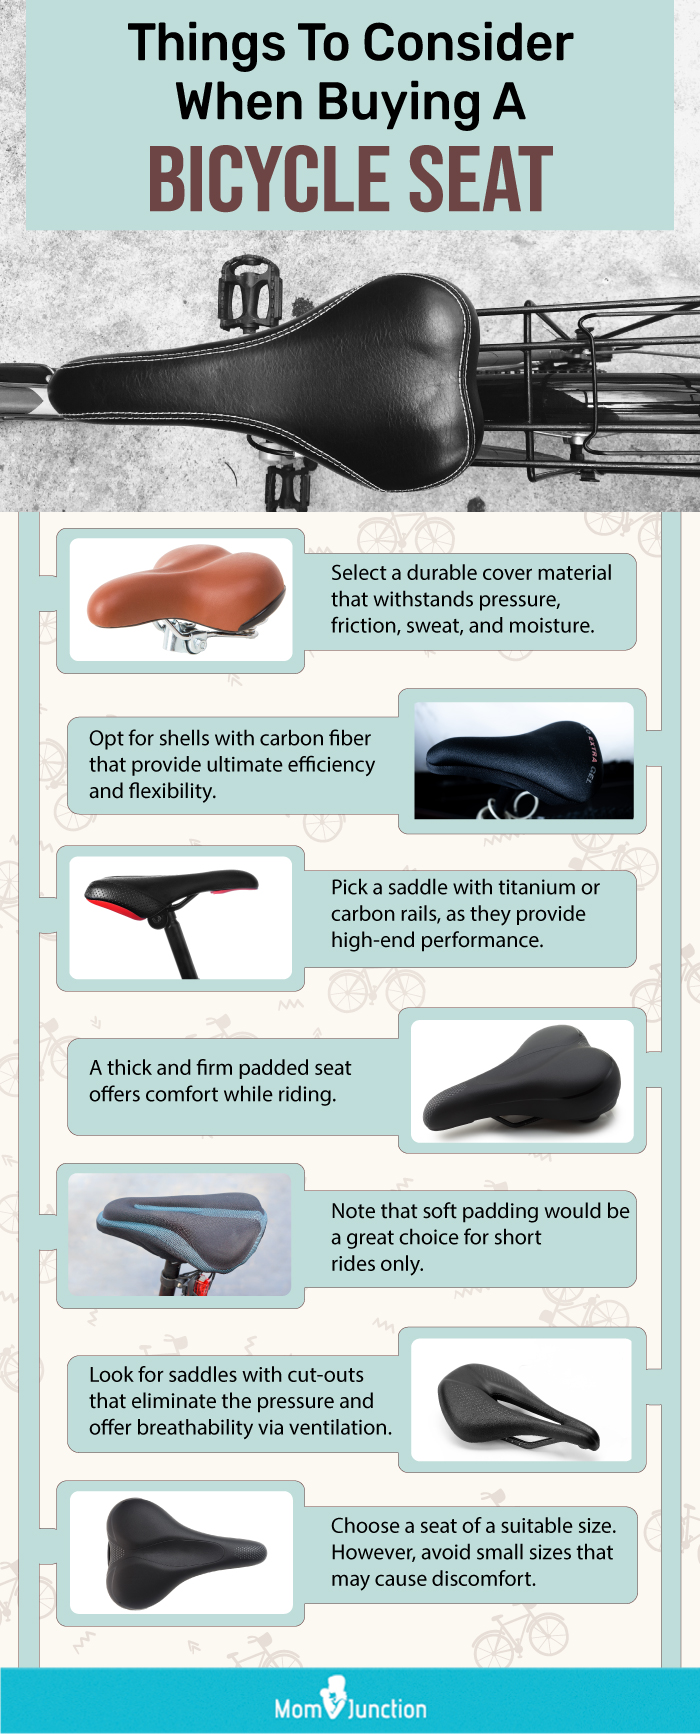 Things To Consider While Buying A Bicycle Seat